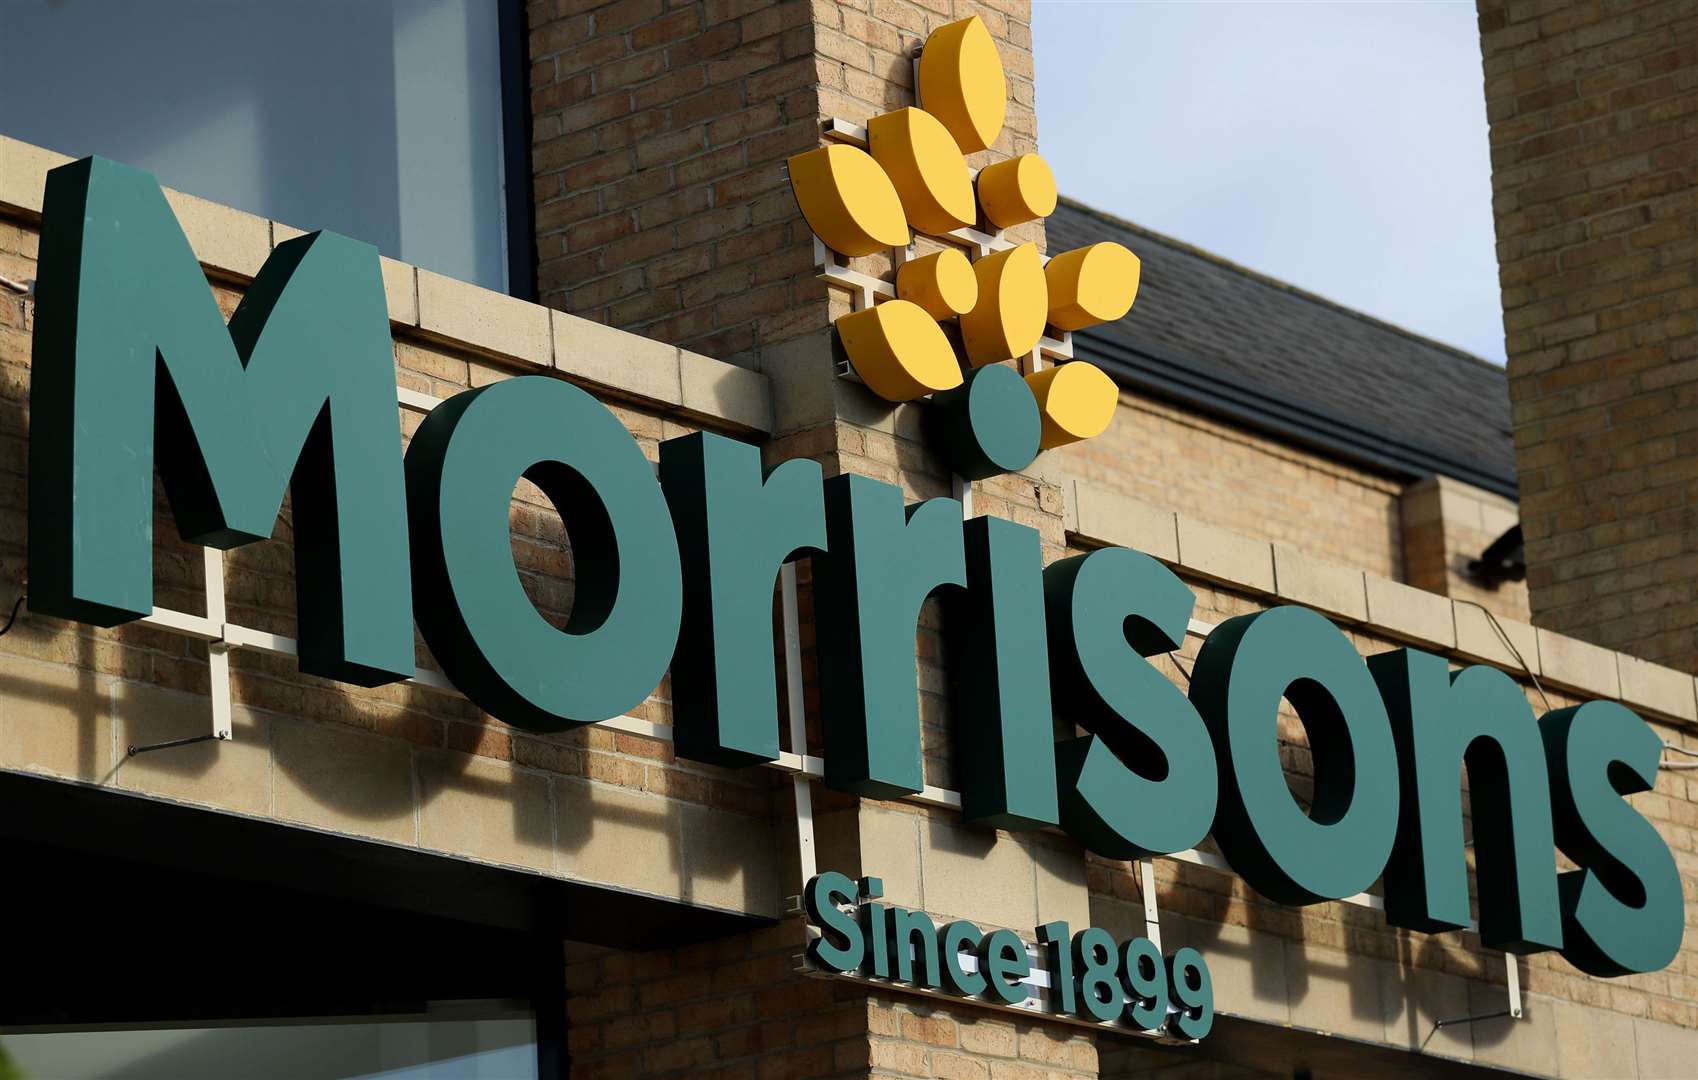 Morrisons is appealing to customers to not open any links or download any attachments within the fake emails